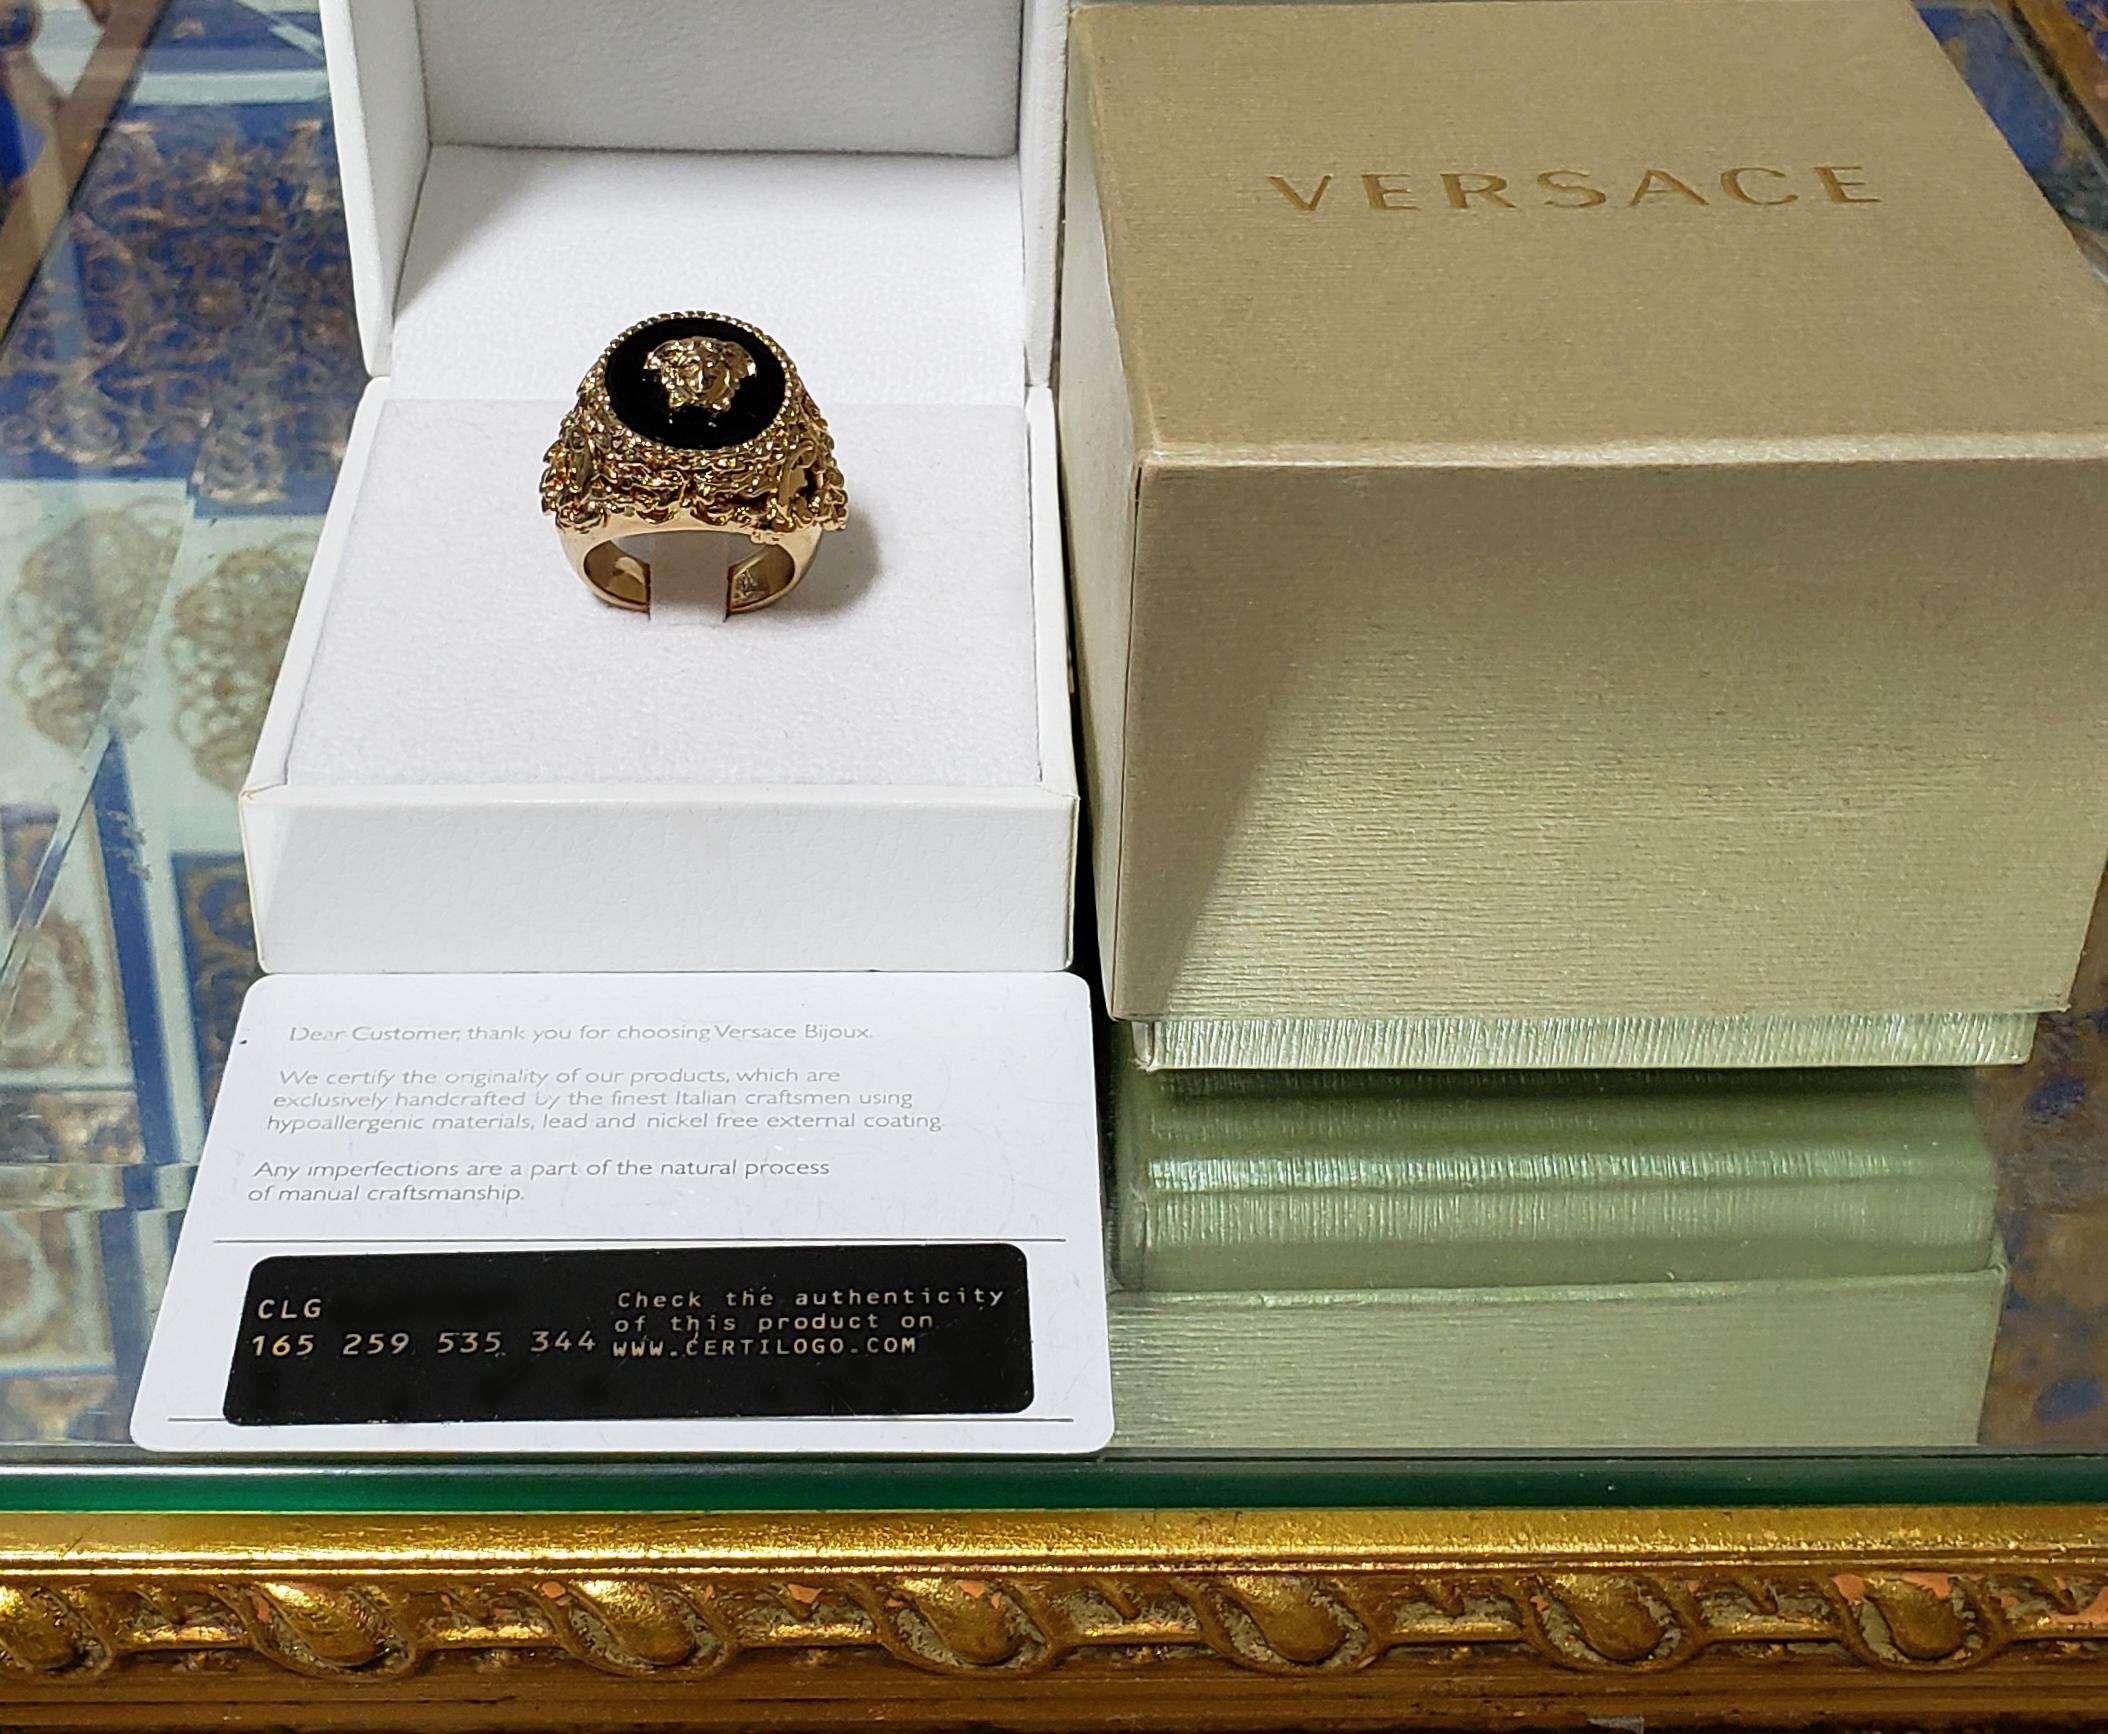 NEW VERSACE 24K GOLD PLATED MEDUSA RING with BLACK size 9.5 4